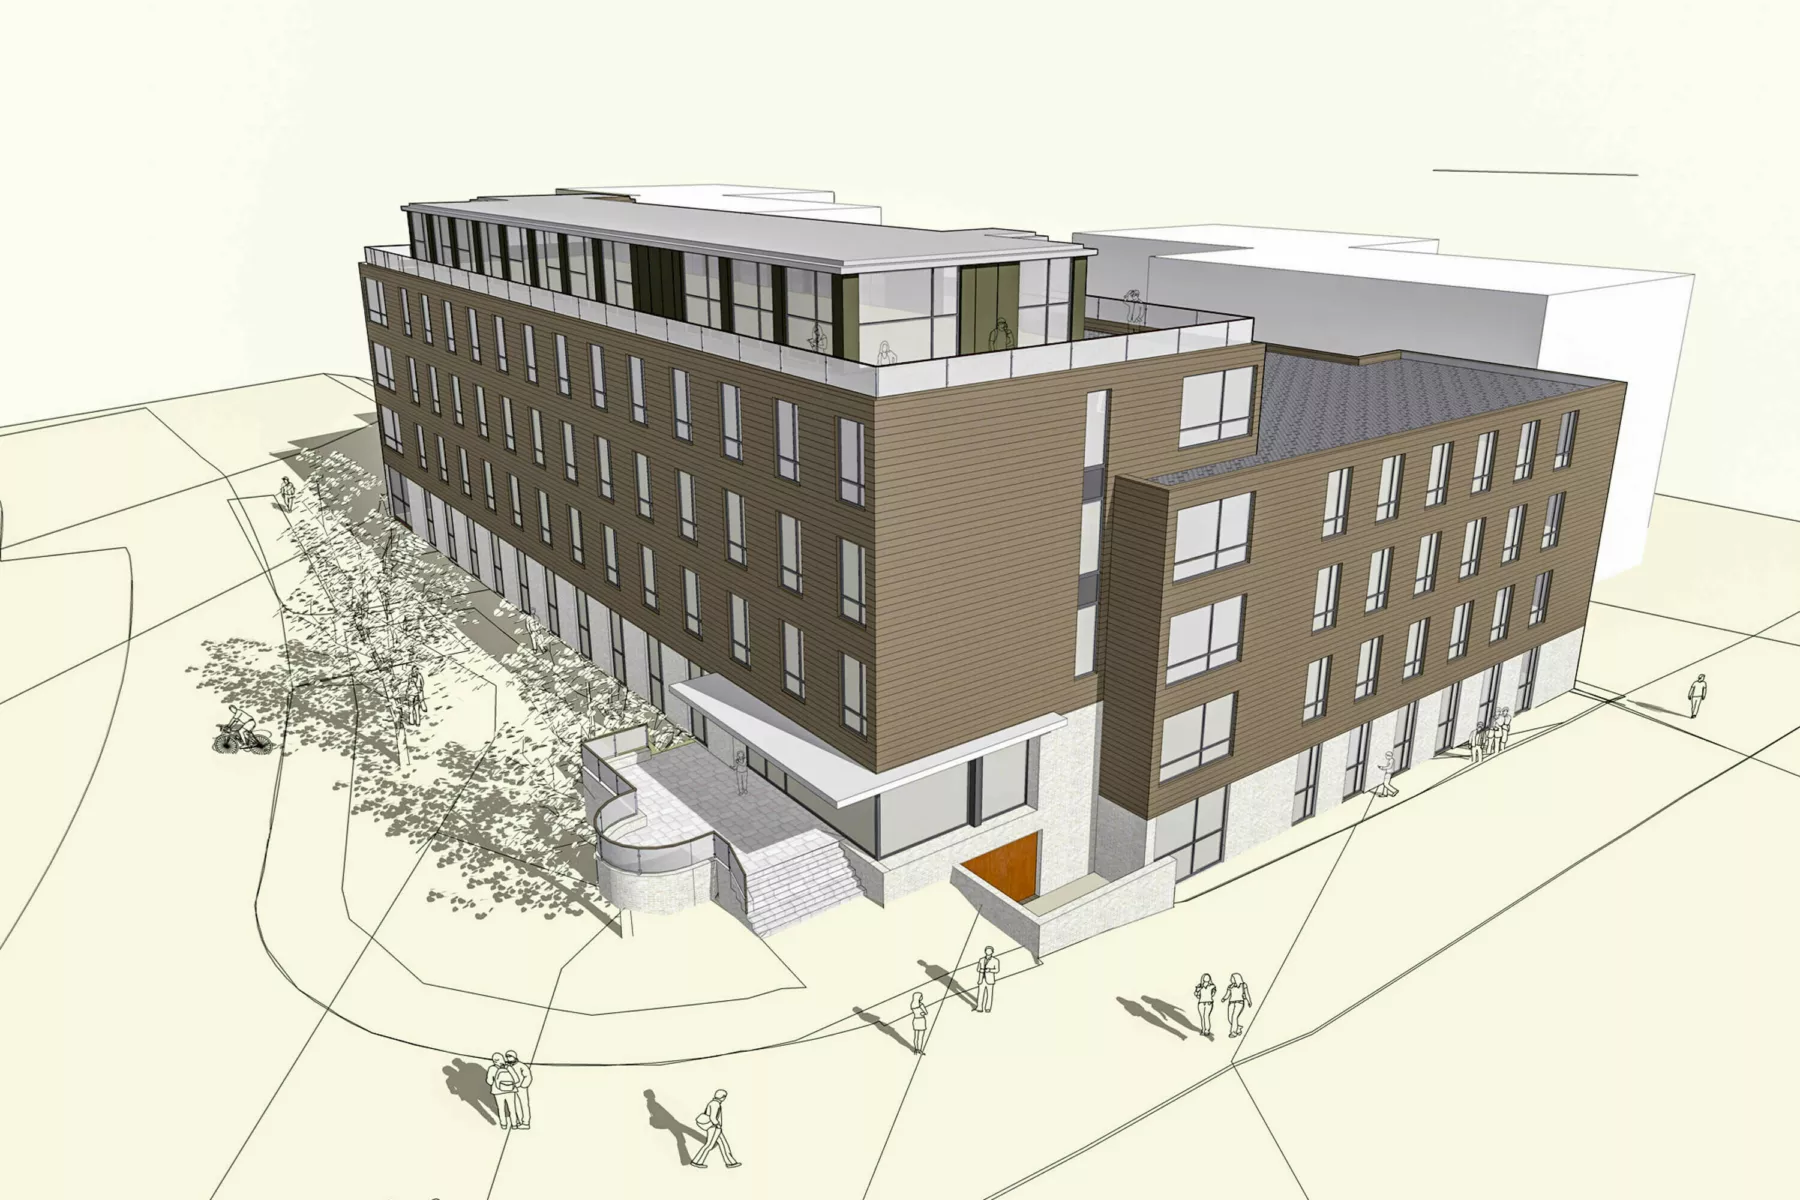 Architectural drawing of L-shaped student accommodation block at University of Edinburgh's Pollock Halls of Residence. The building has 5 storeys with a penthouse-style top floor with roof terrace. Middle three storeys clad in bronze-coloured material, with the ground floor in pale brick and the top floor in silver coloured cladding.